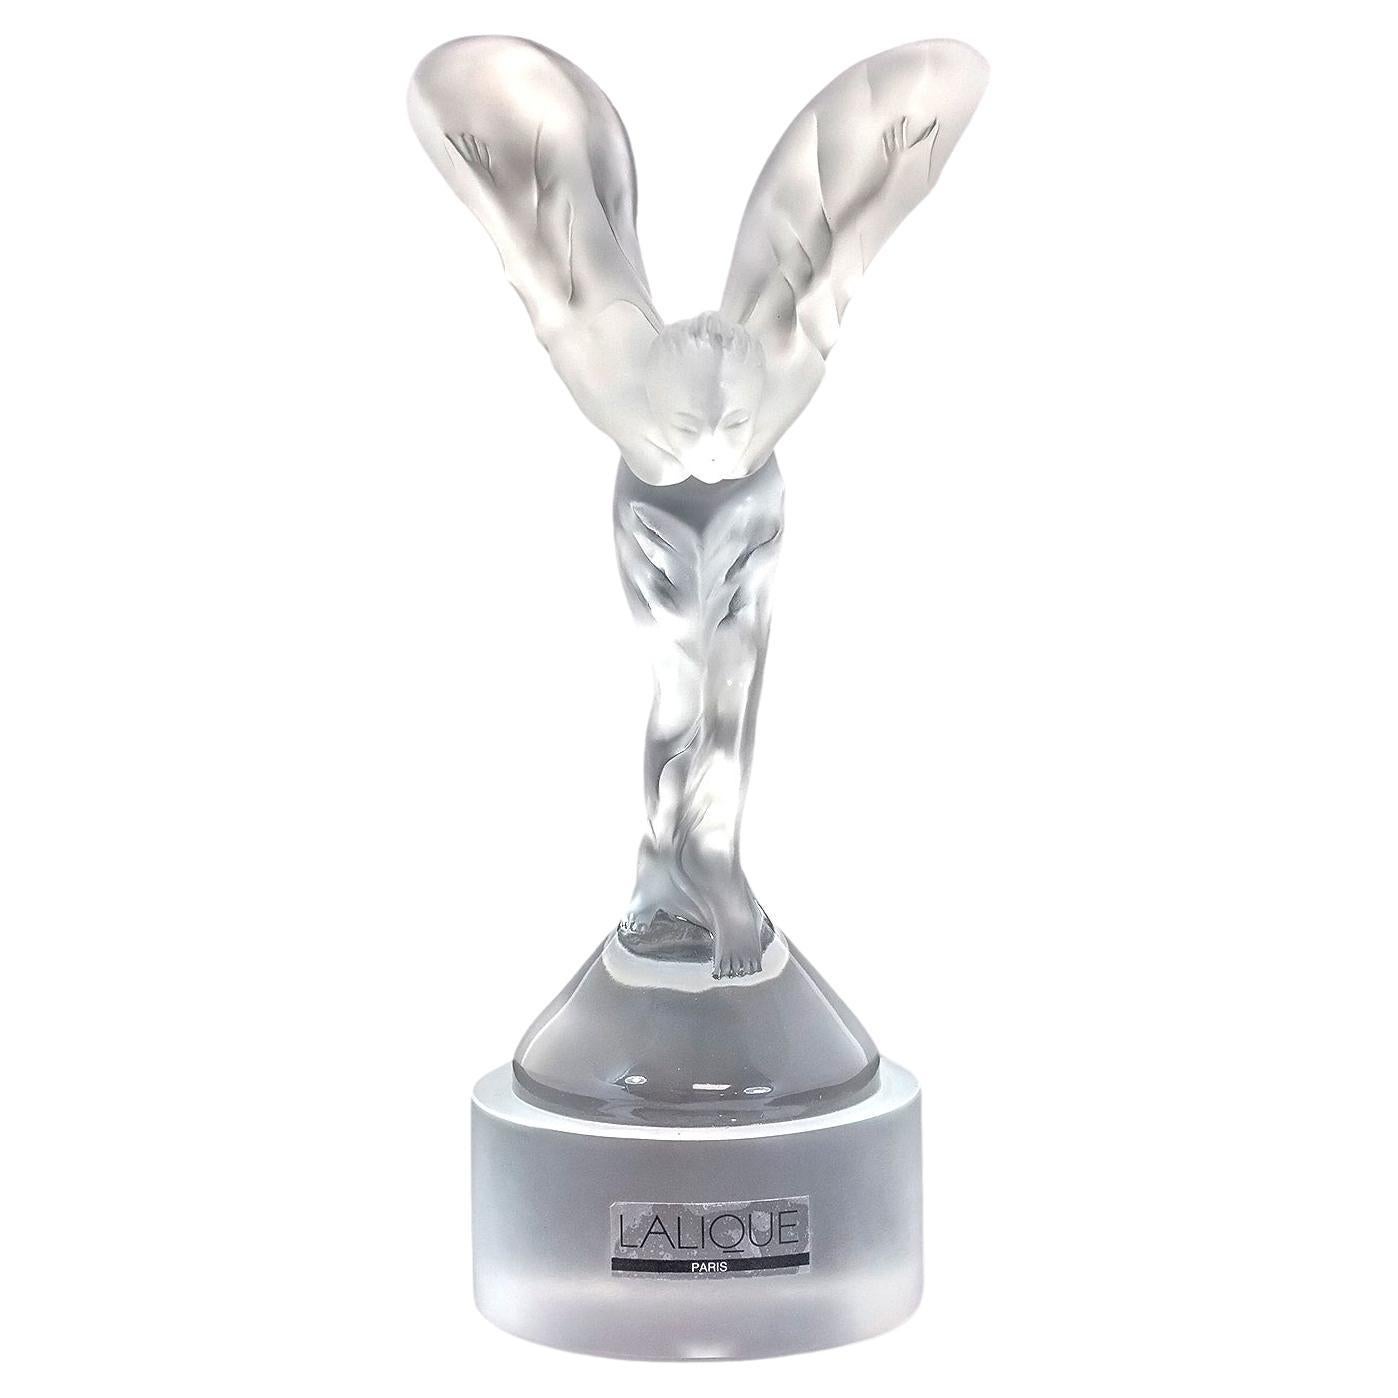 Lalique Spirit of Ecstasy Limited Edition Figure 